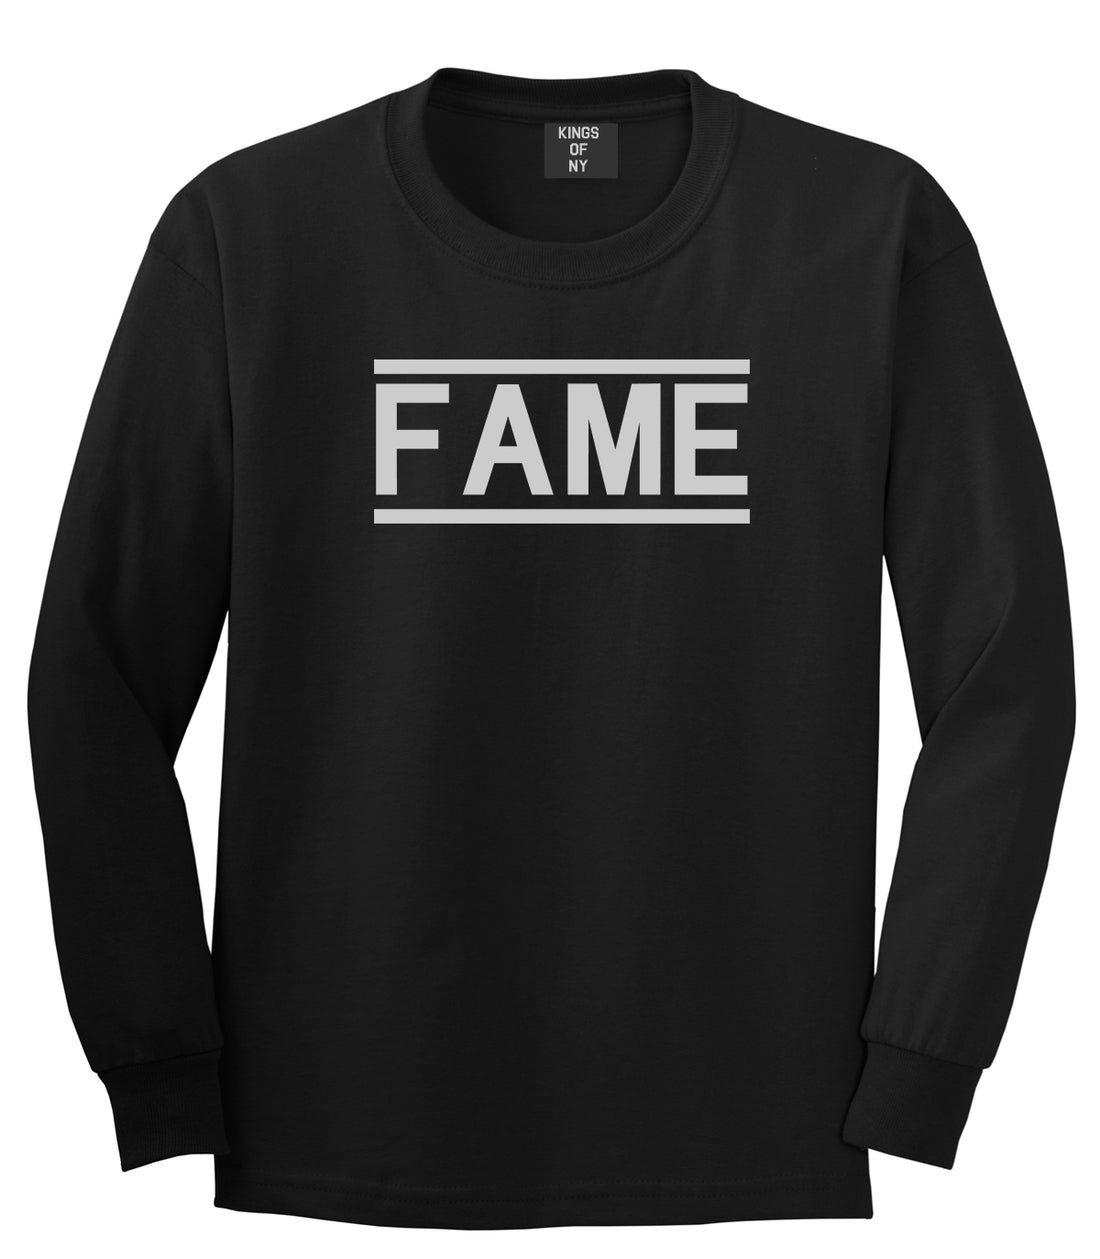 Fame Famous Mens Black Long Sleeve T-Shirt by KINGS OF NY